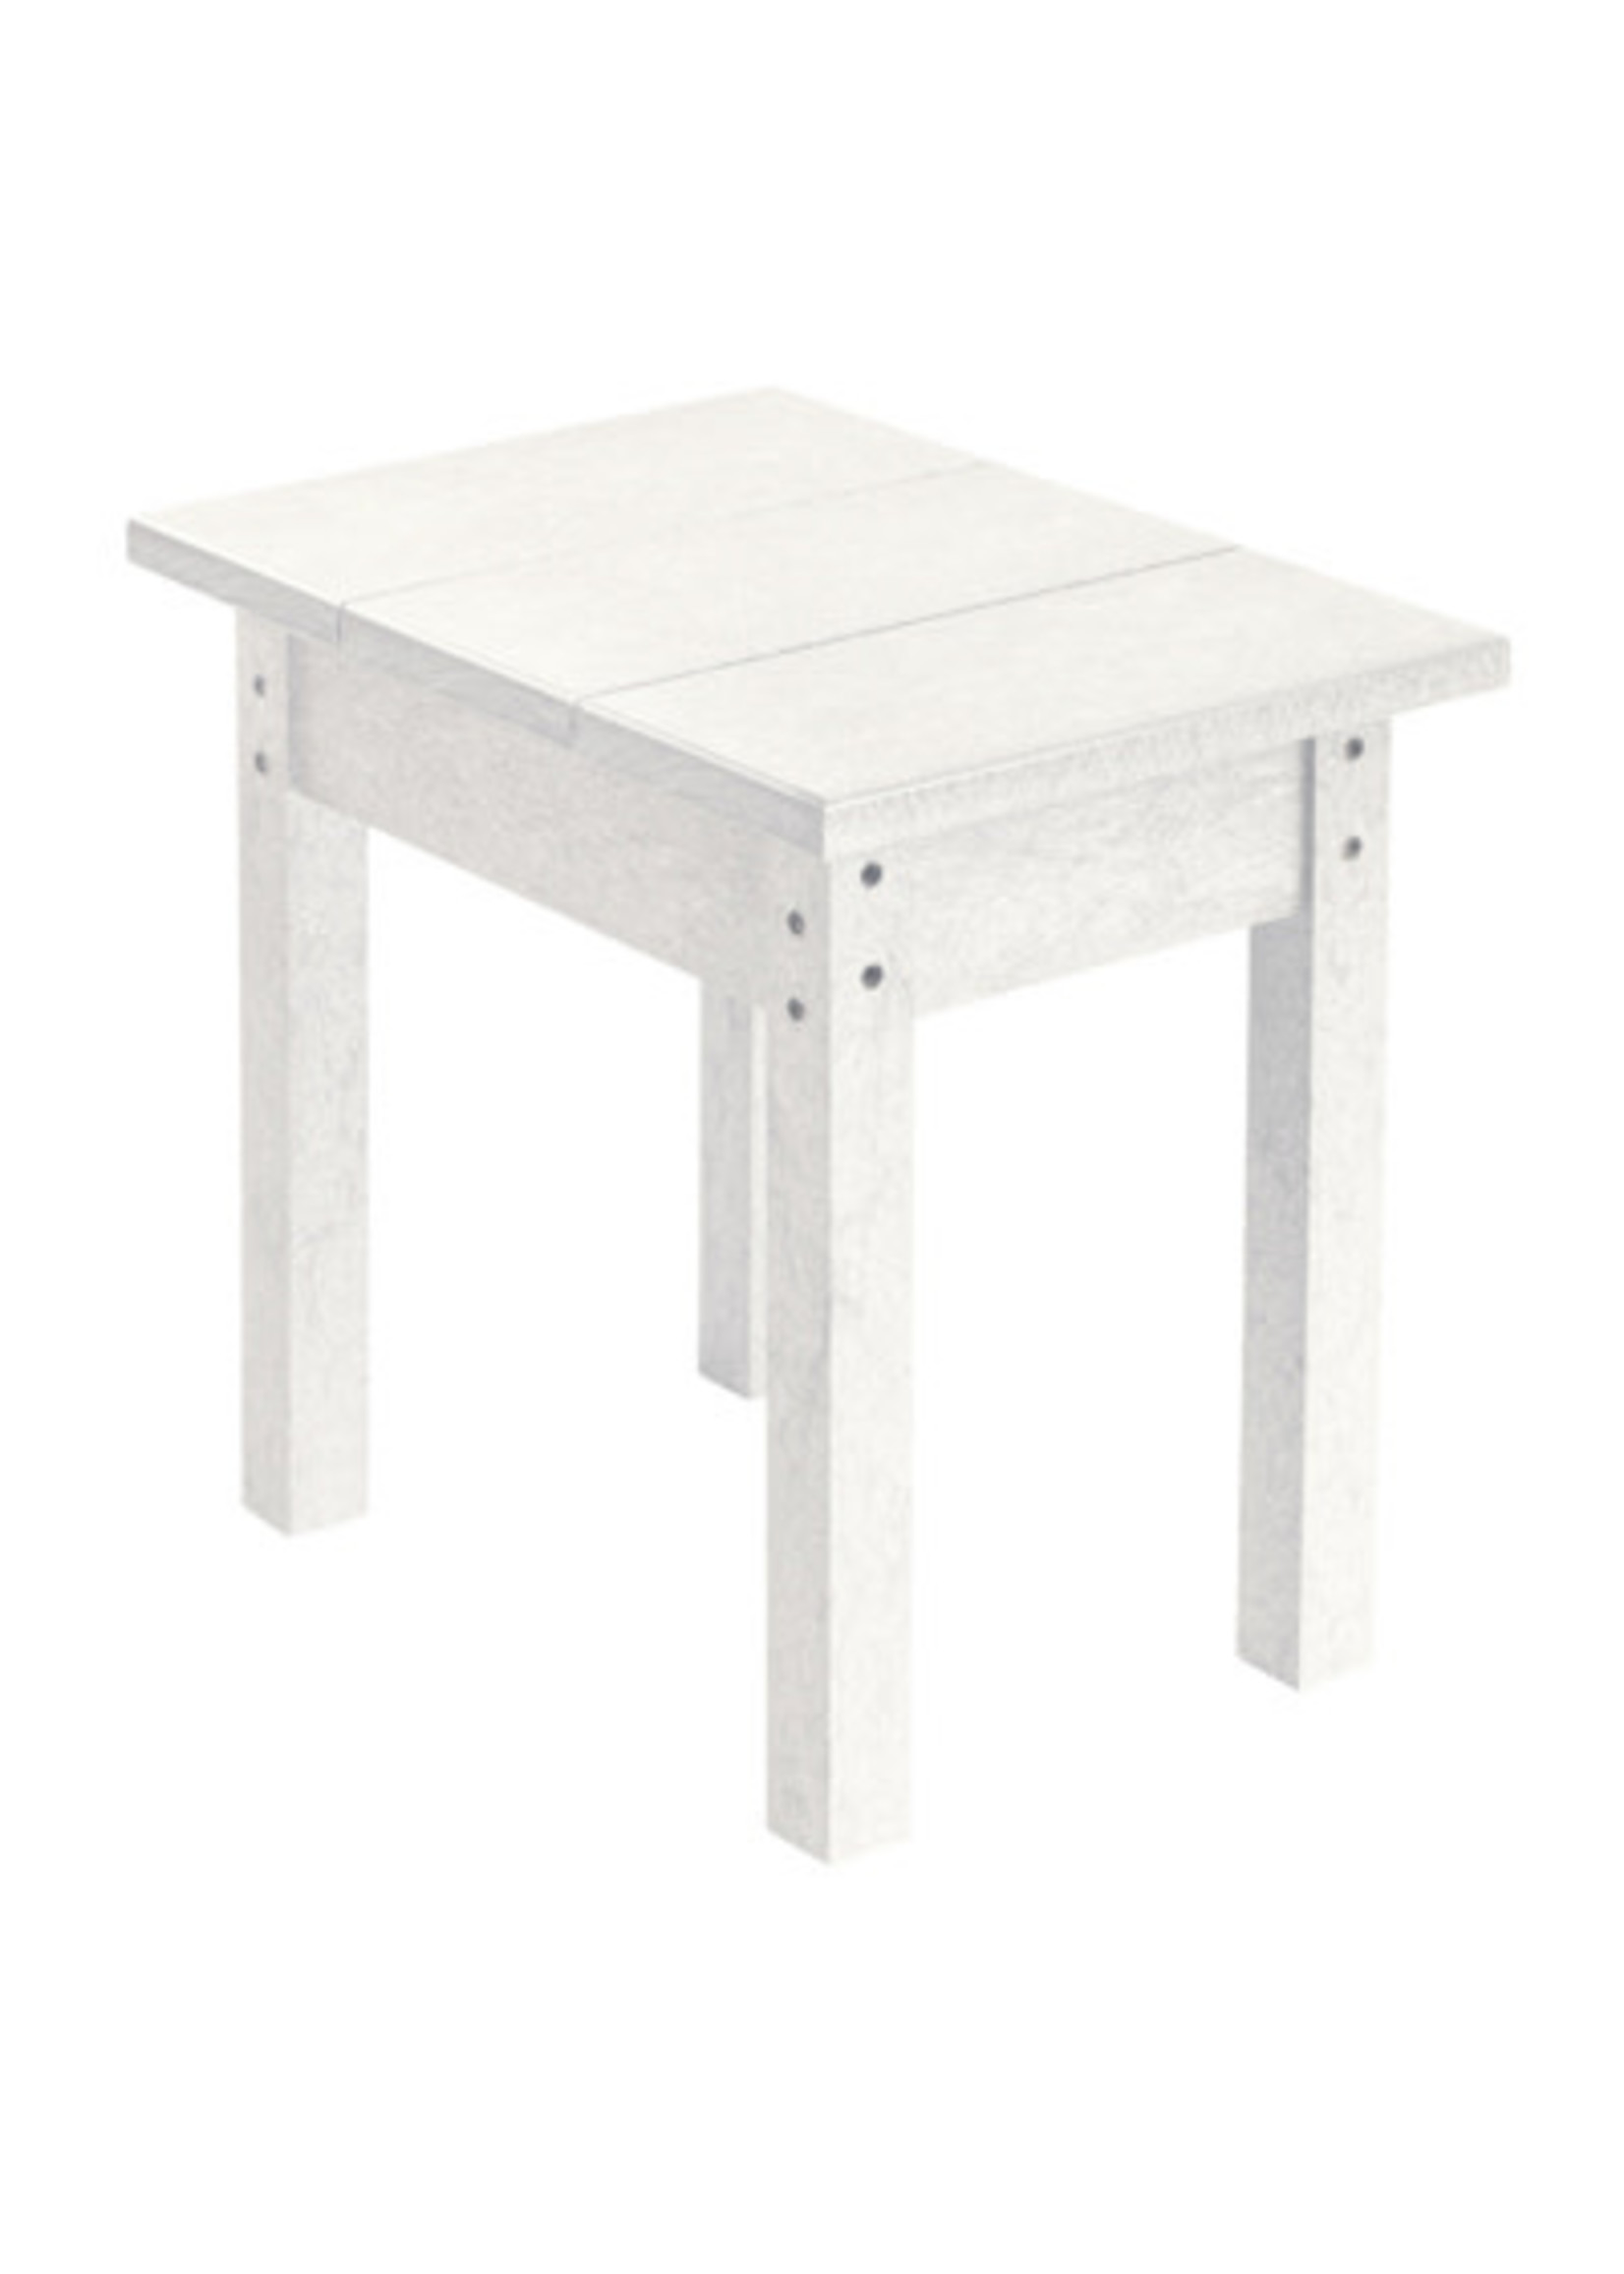 C.R. Plastic Products Small Rectangular Table